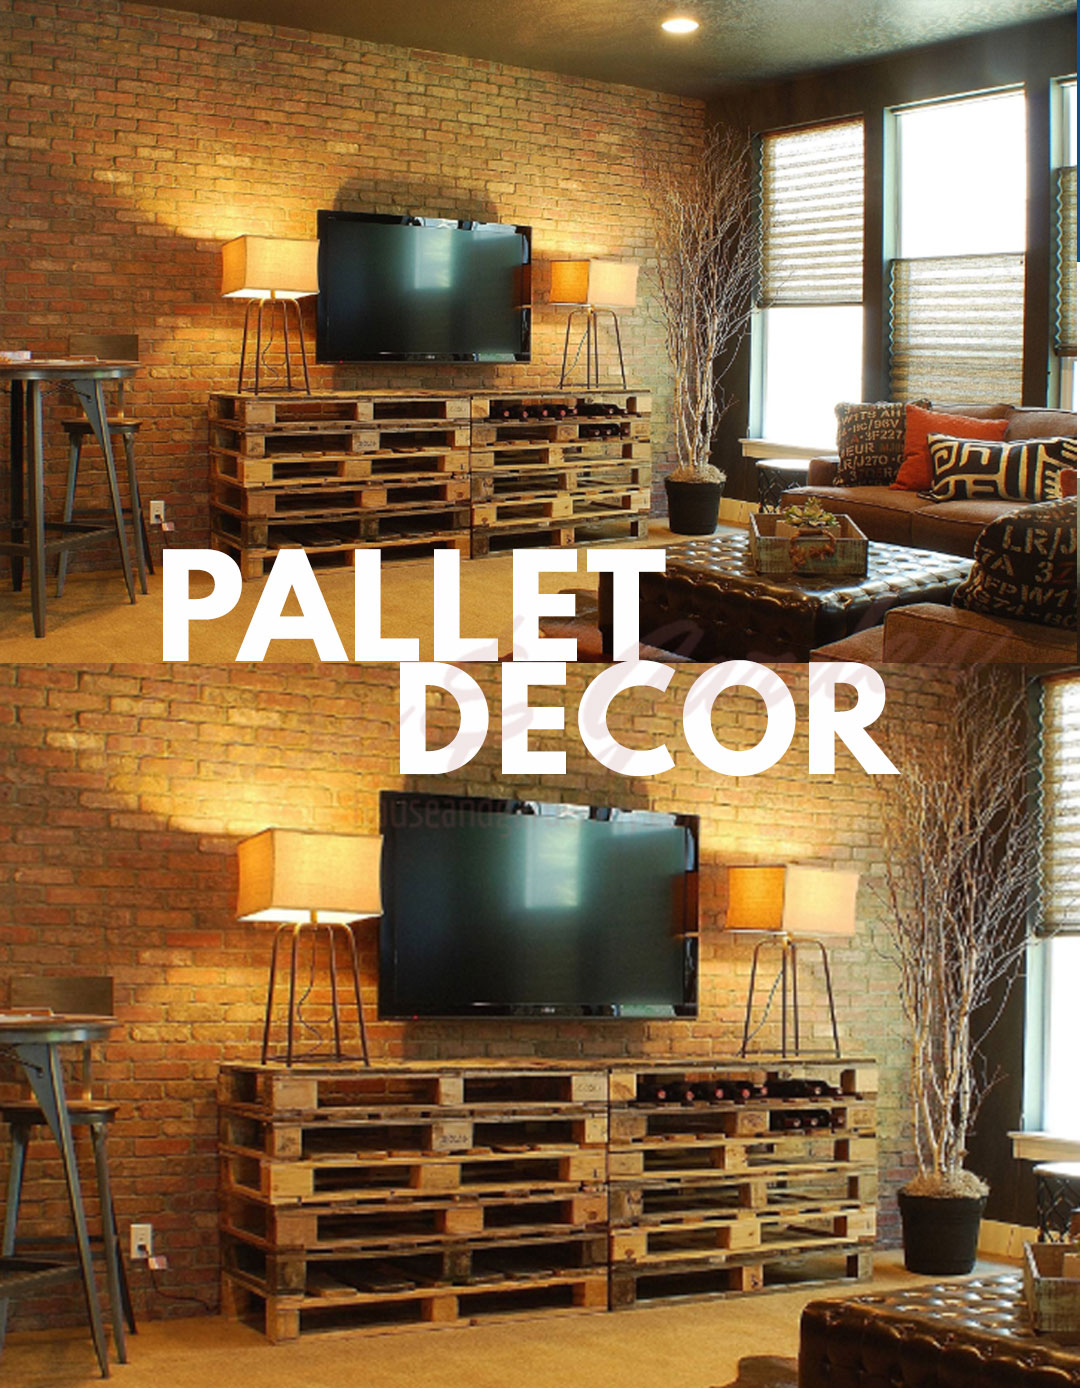 how to build pallet bed